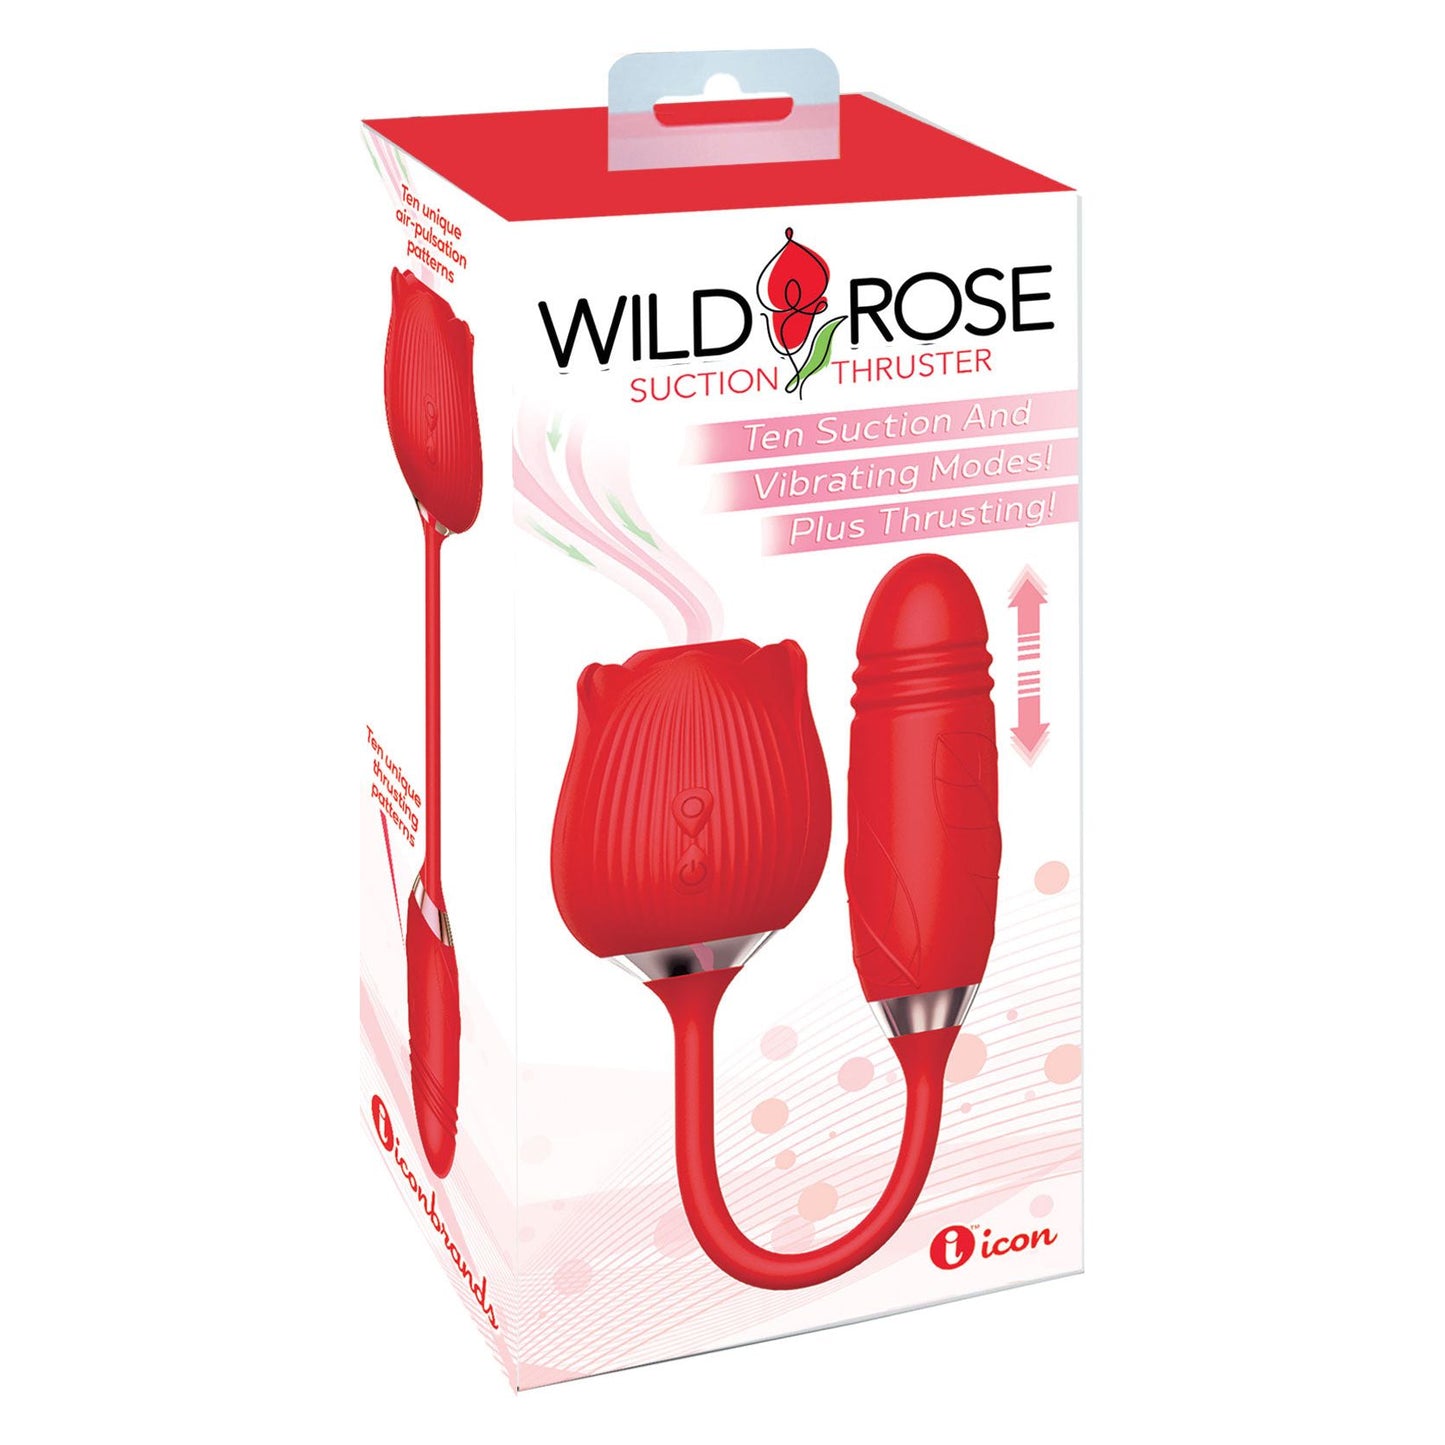 Wild Rose Suction Thruster - Red IC1702